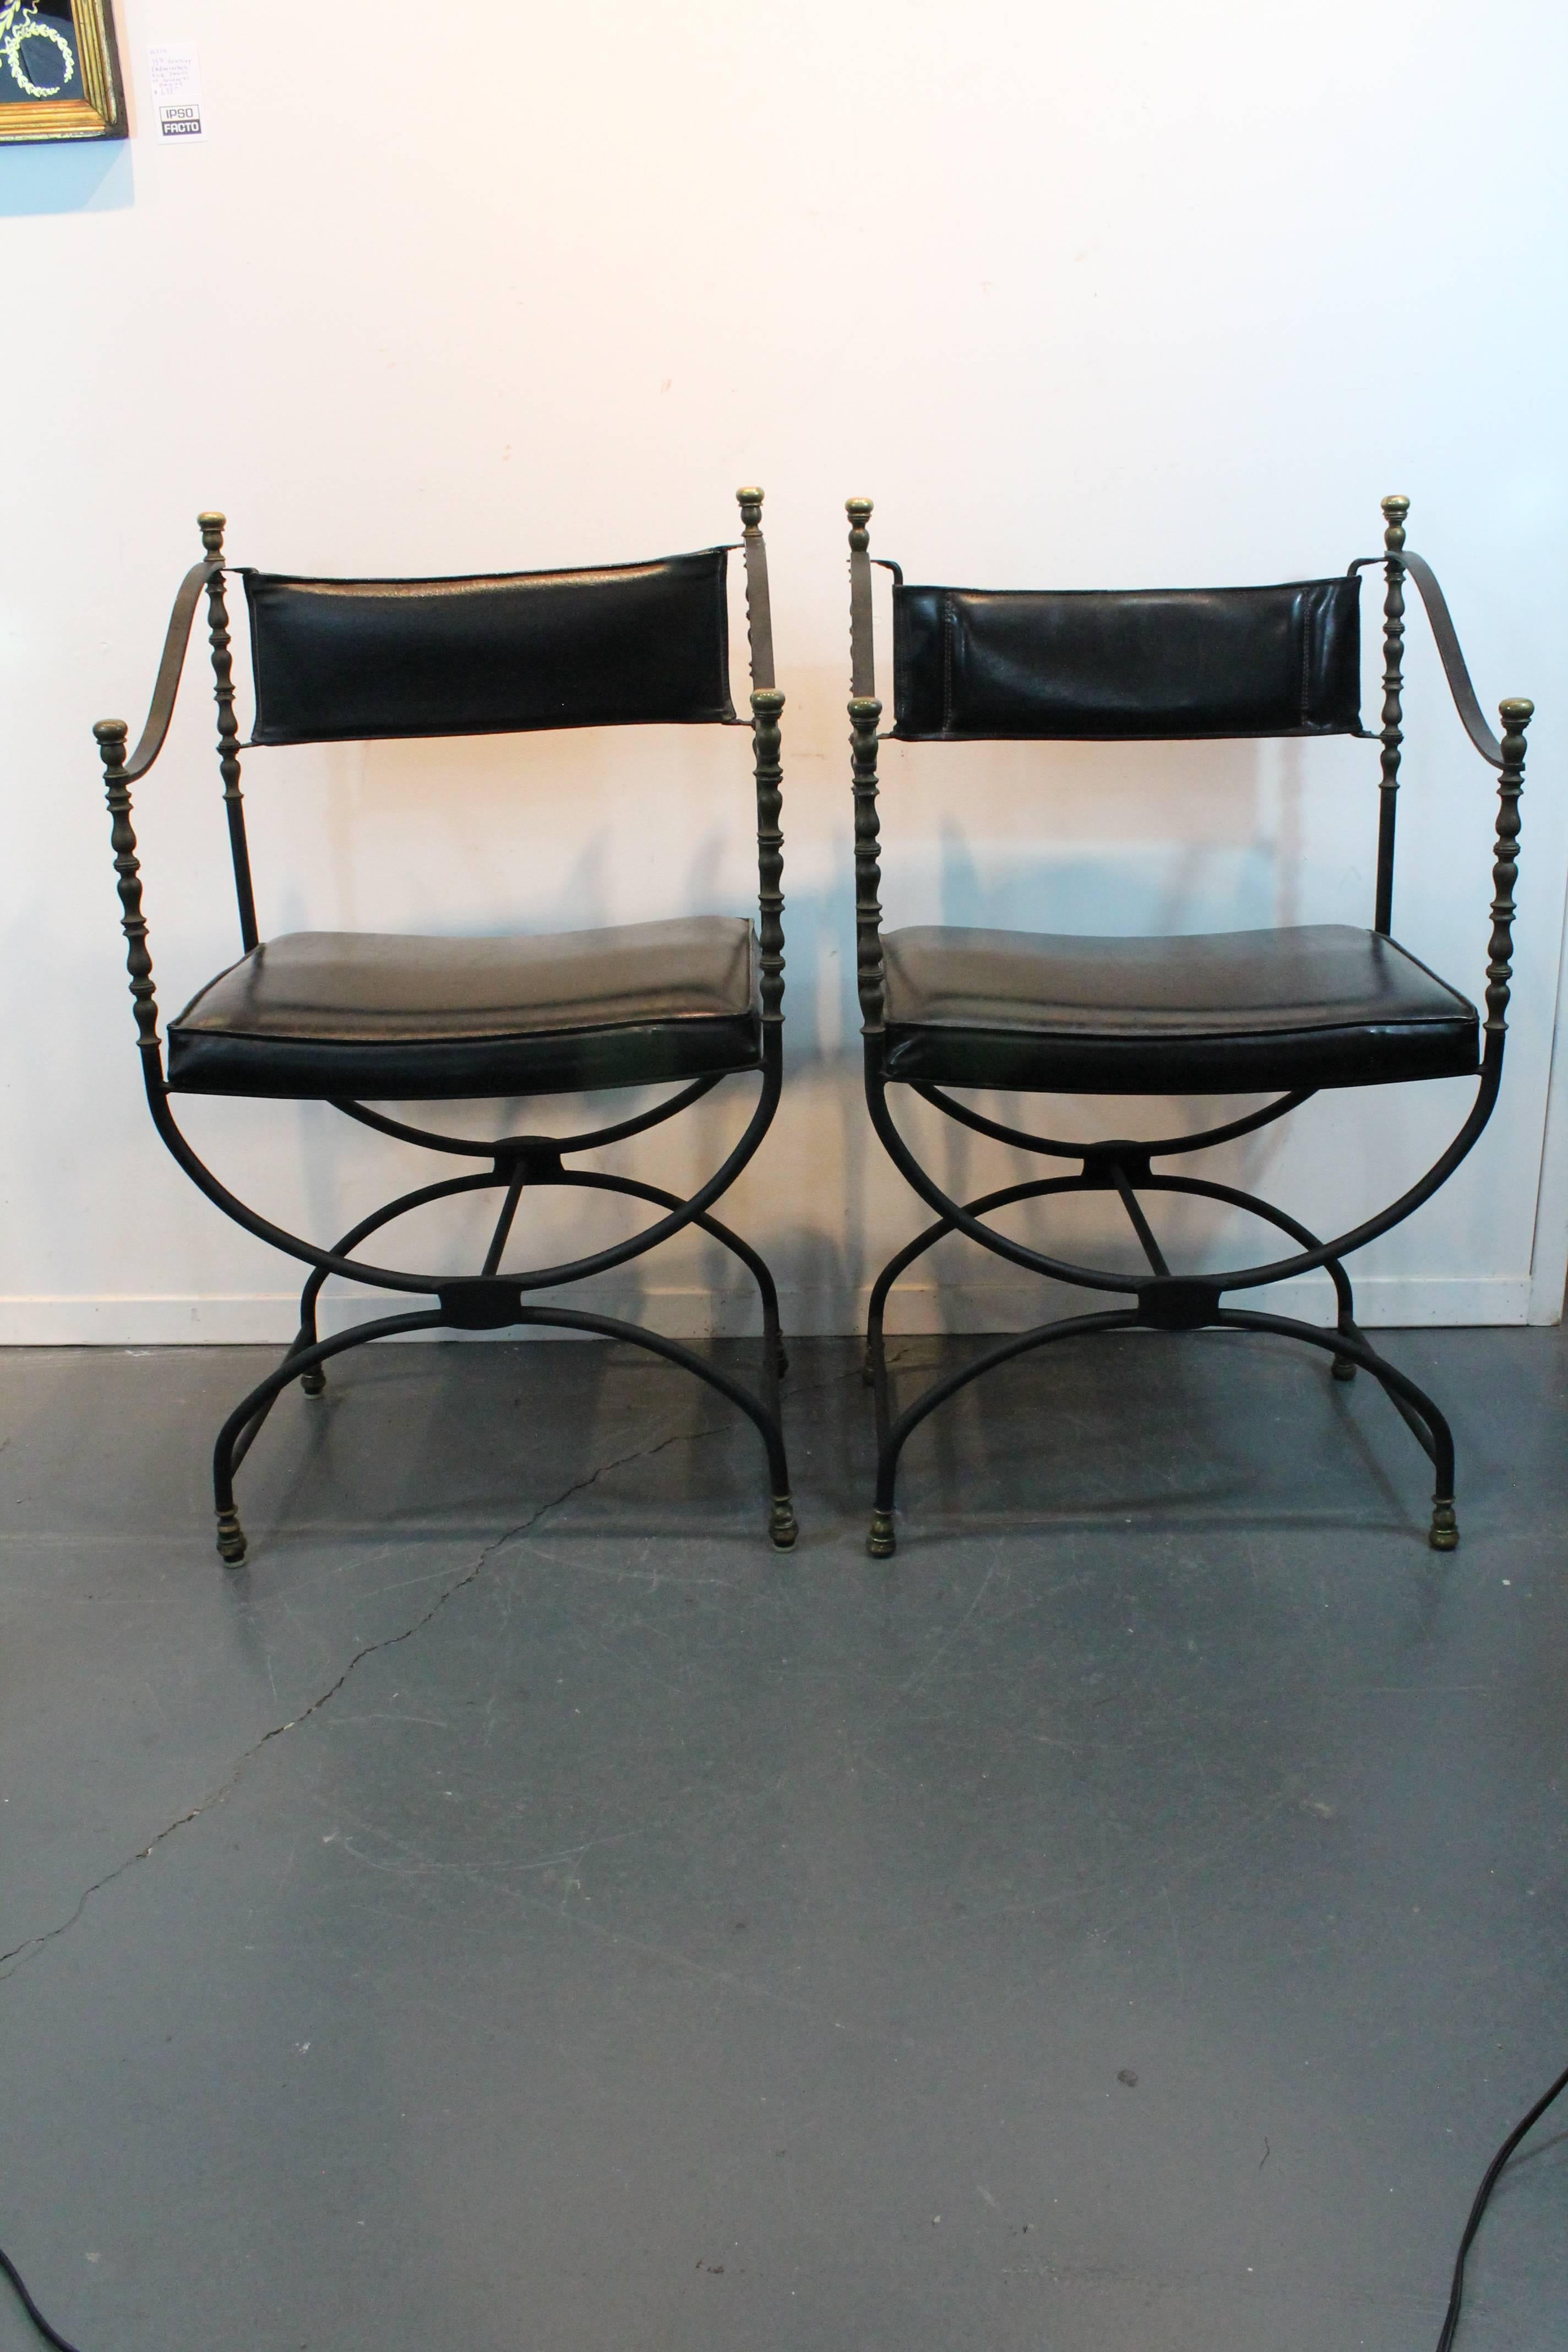 Great sculptural Savonarola armchairs.
Iron form with brass feet, finials and columns.
Vinyl seats and backs. There are two chairs that have a different back vinyl construction from the other two, as shown in close up images.